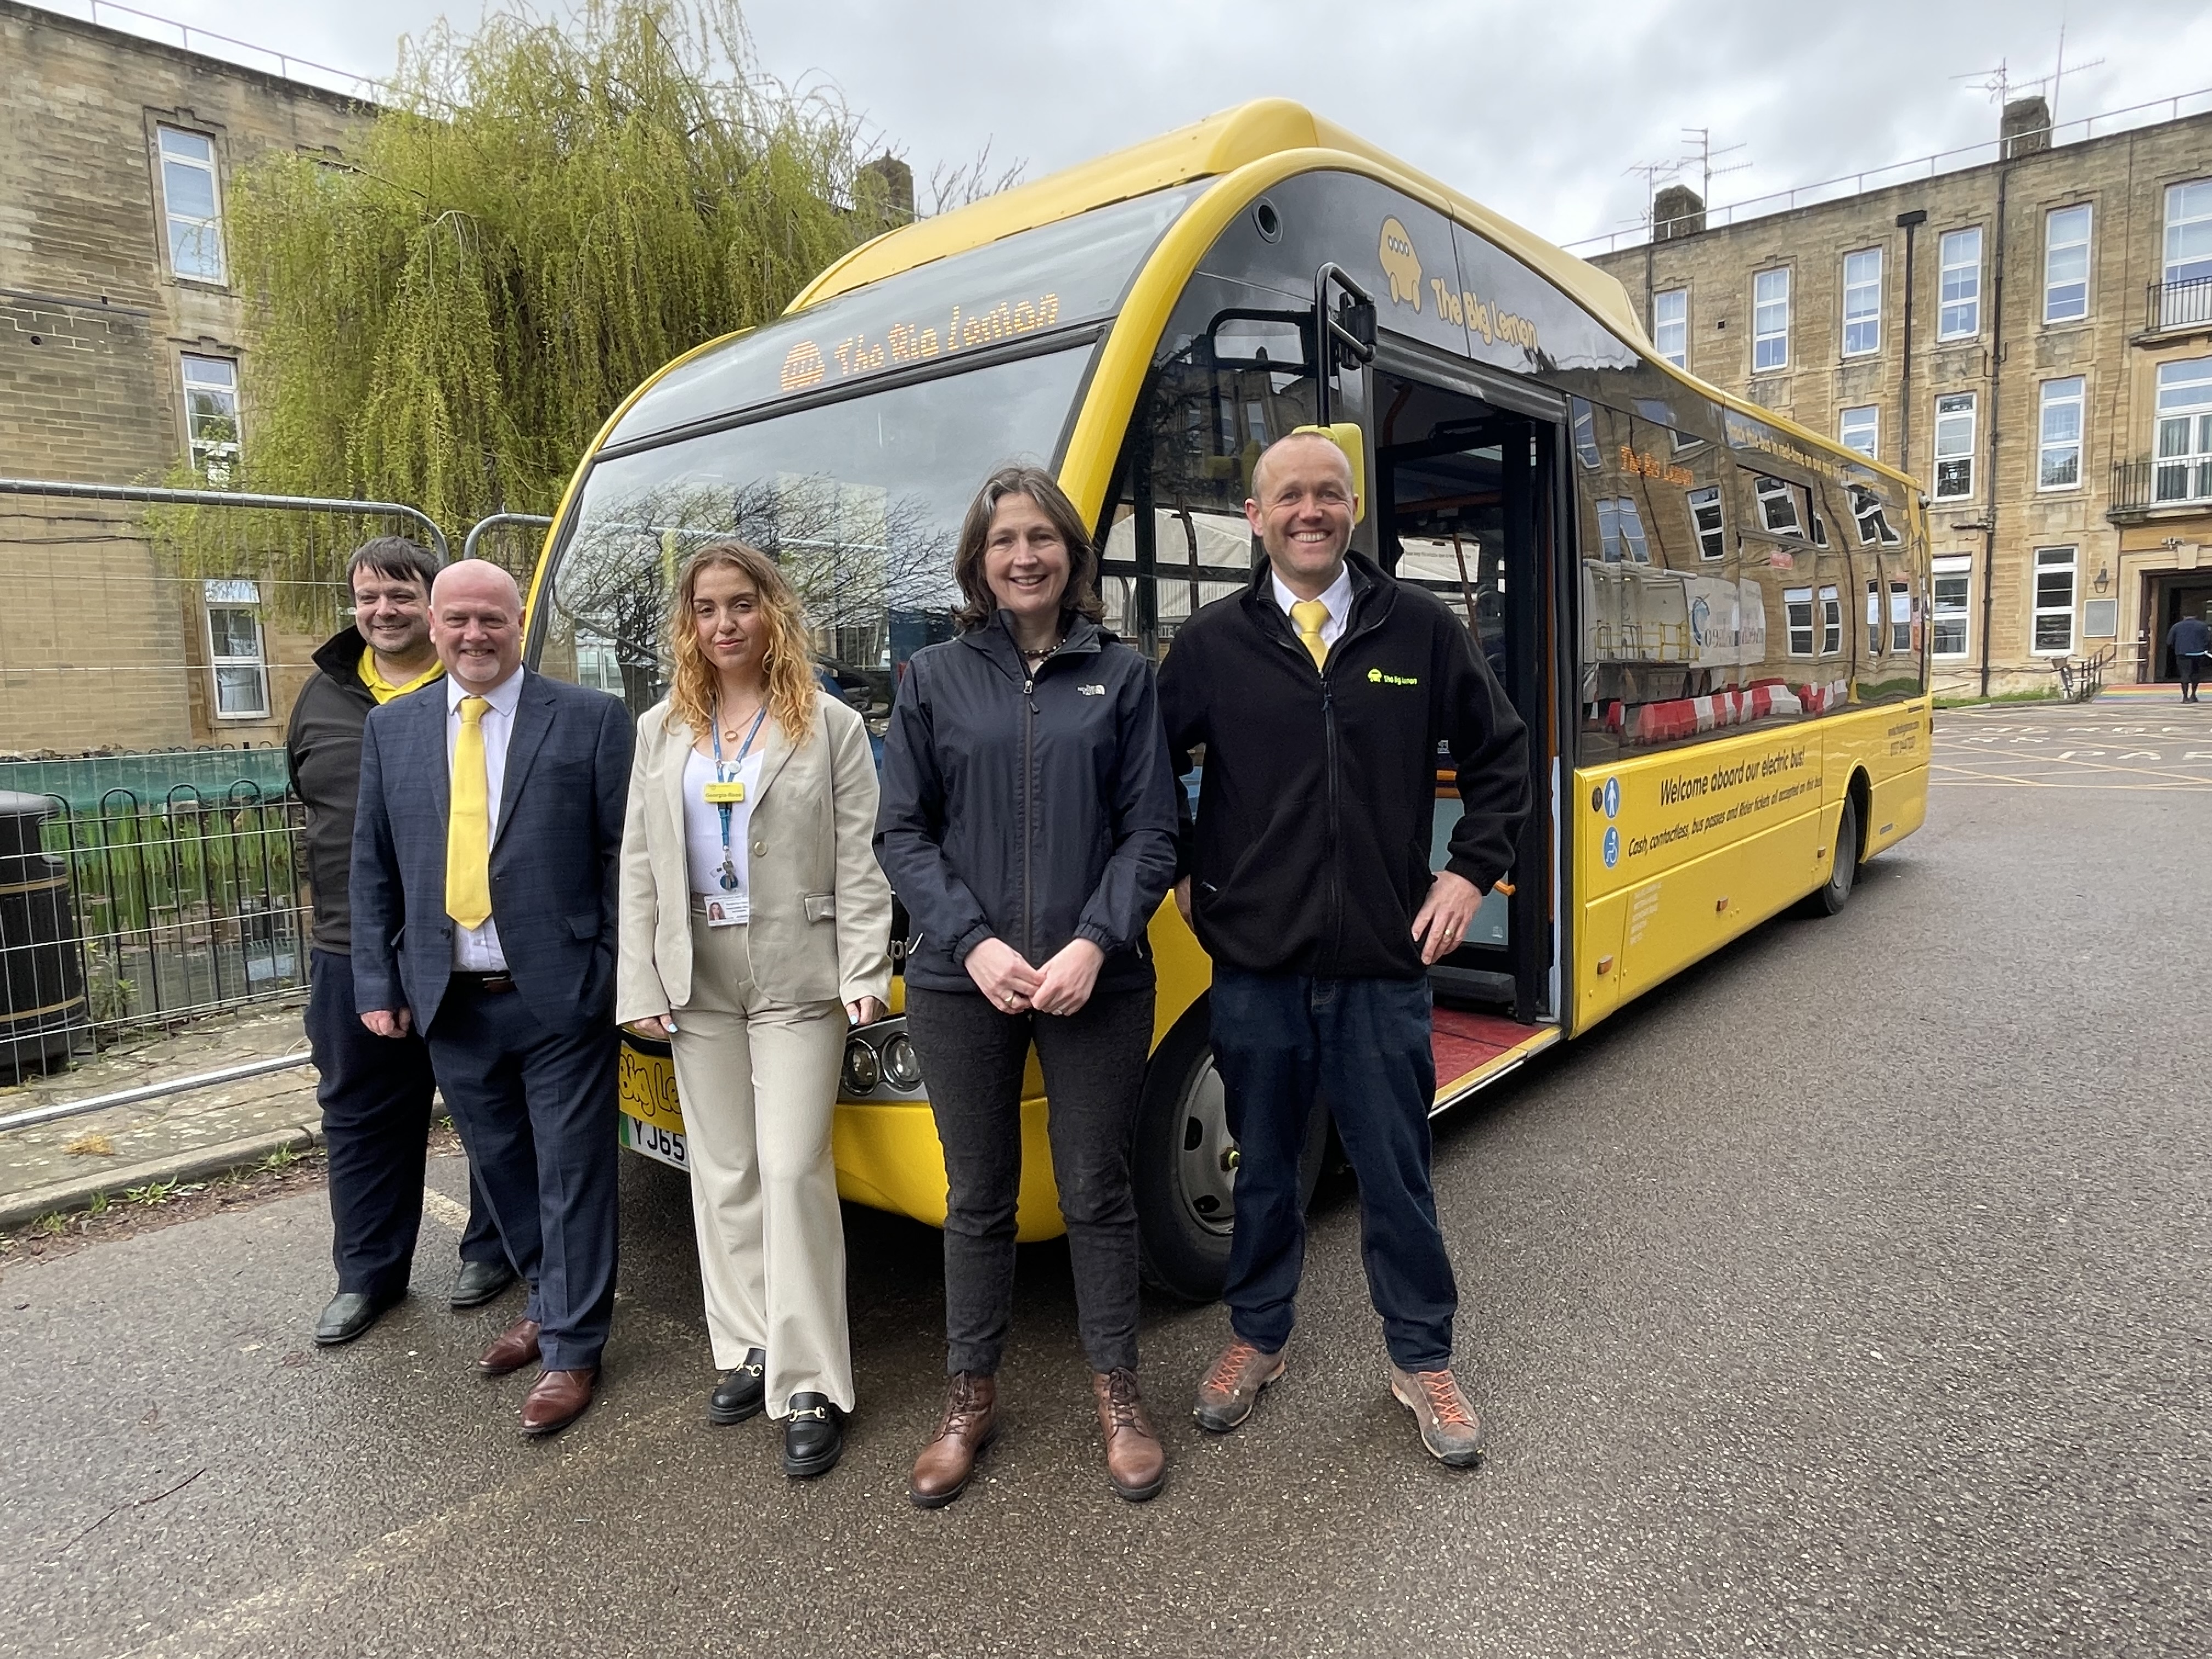 In front of a yellow bus at the Royal United Hospital: Photo caption (left to right): Tom Druitt, CEO at The Big Lemon; Councillor Sarah Warren; Georgia-Rose Gleeson, Sustainability Officer at The Royal United Hospital; Colin Morris, General Manager at The Big Lemon; Jason Freeman, Operations Manager Bristol & The West at The Big Lemon